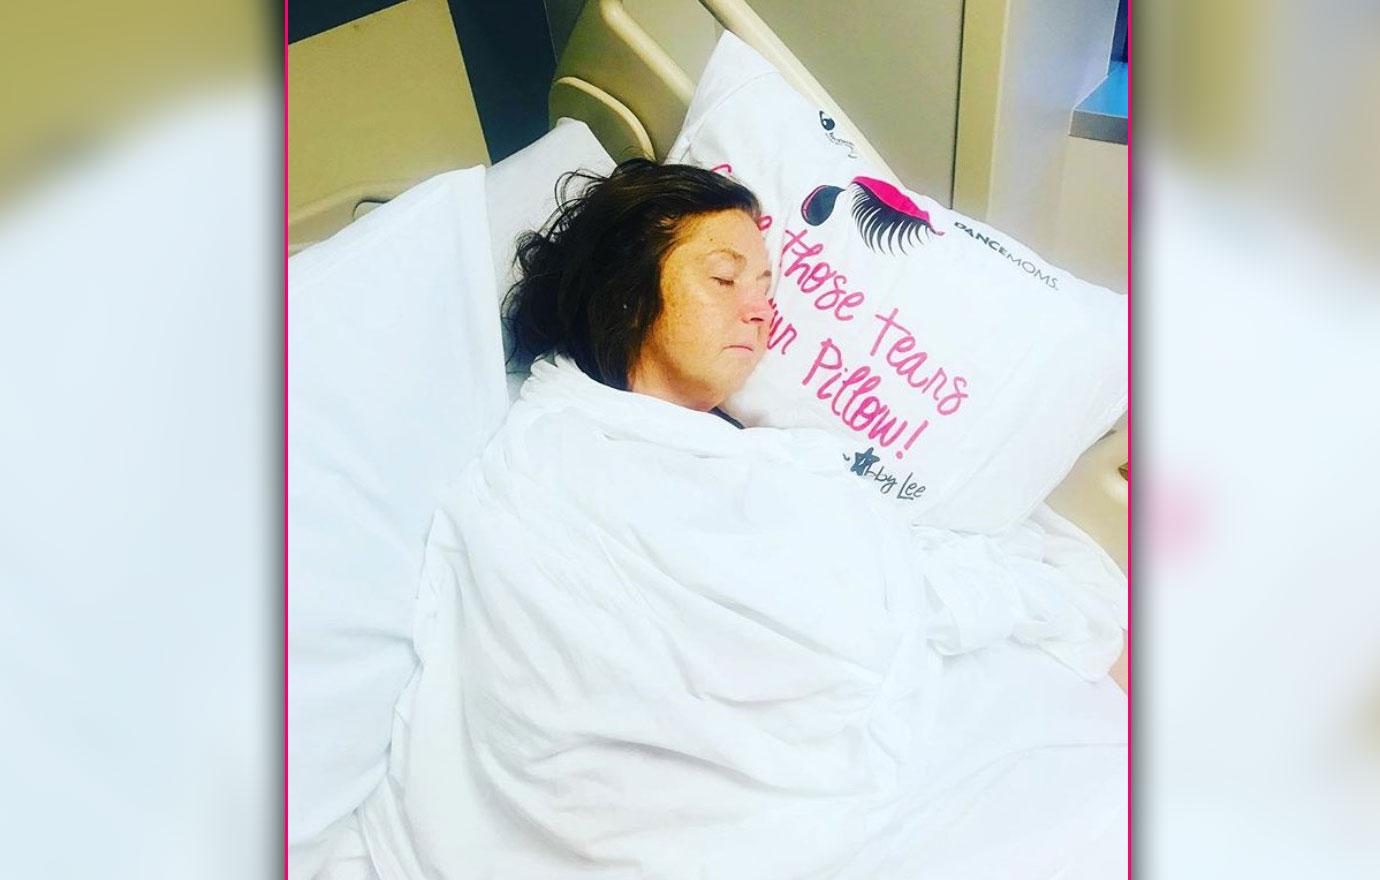 Abby Lee Miller New Hospital Bed Photo Tears On Pillow Cancer Battle 0348